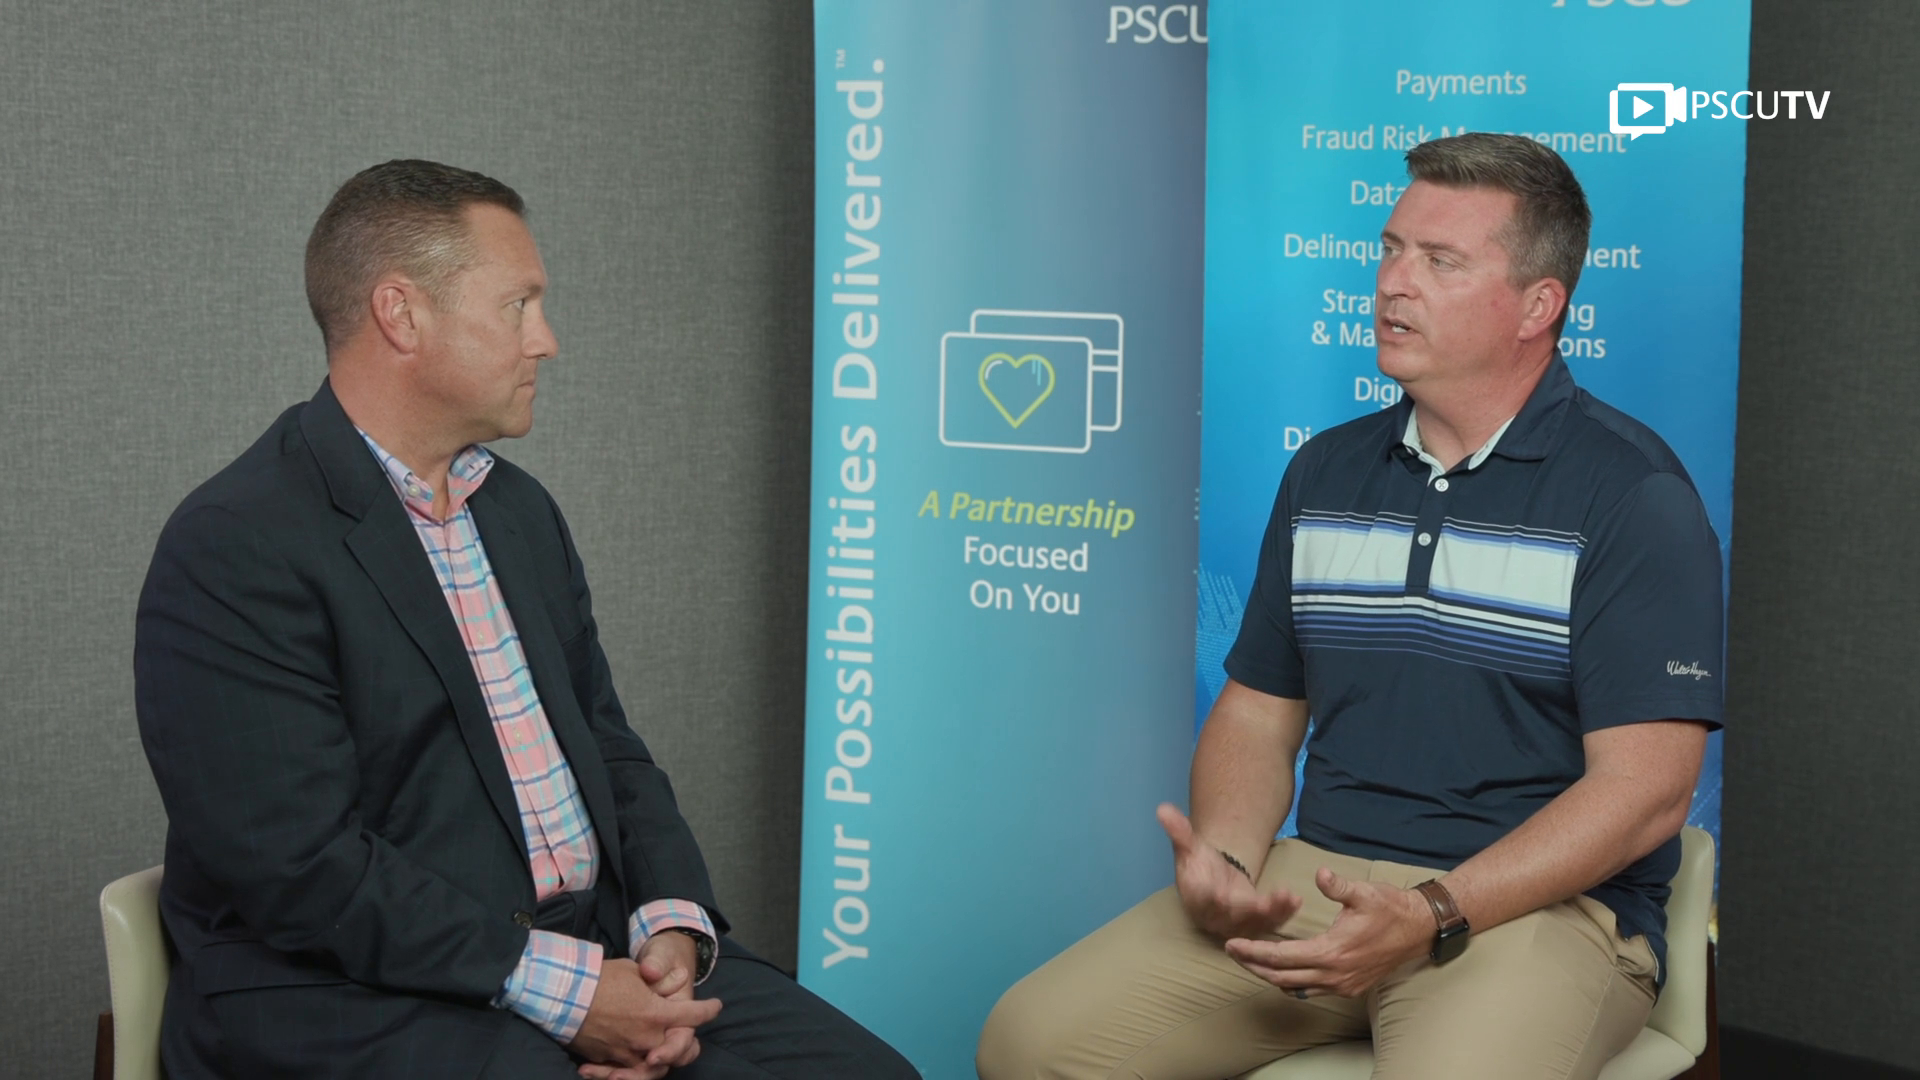 "PSCUTV Episode 13: Jeremiah Lotz — Personalization and Connected Experiences post thumbnail"